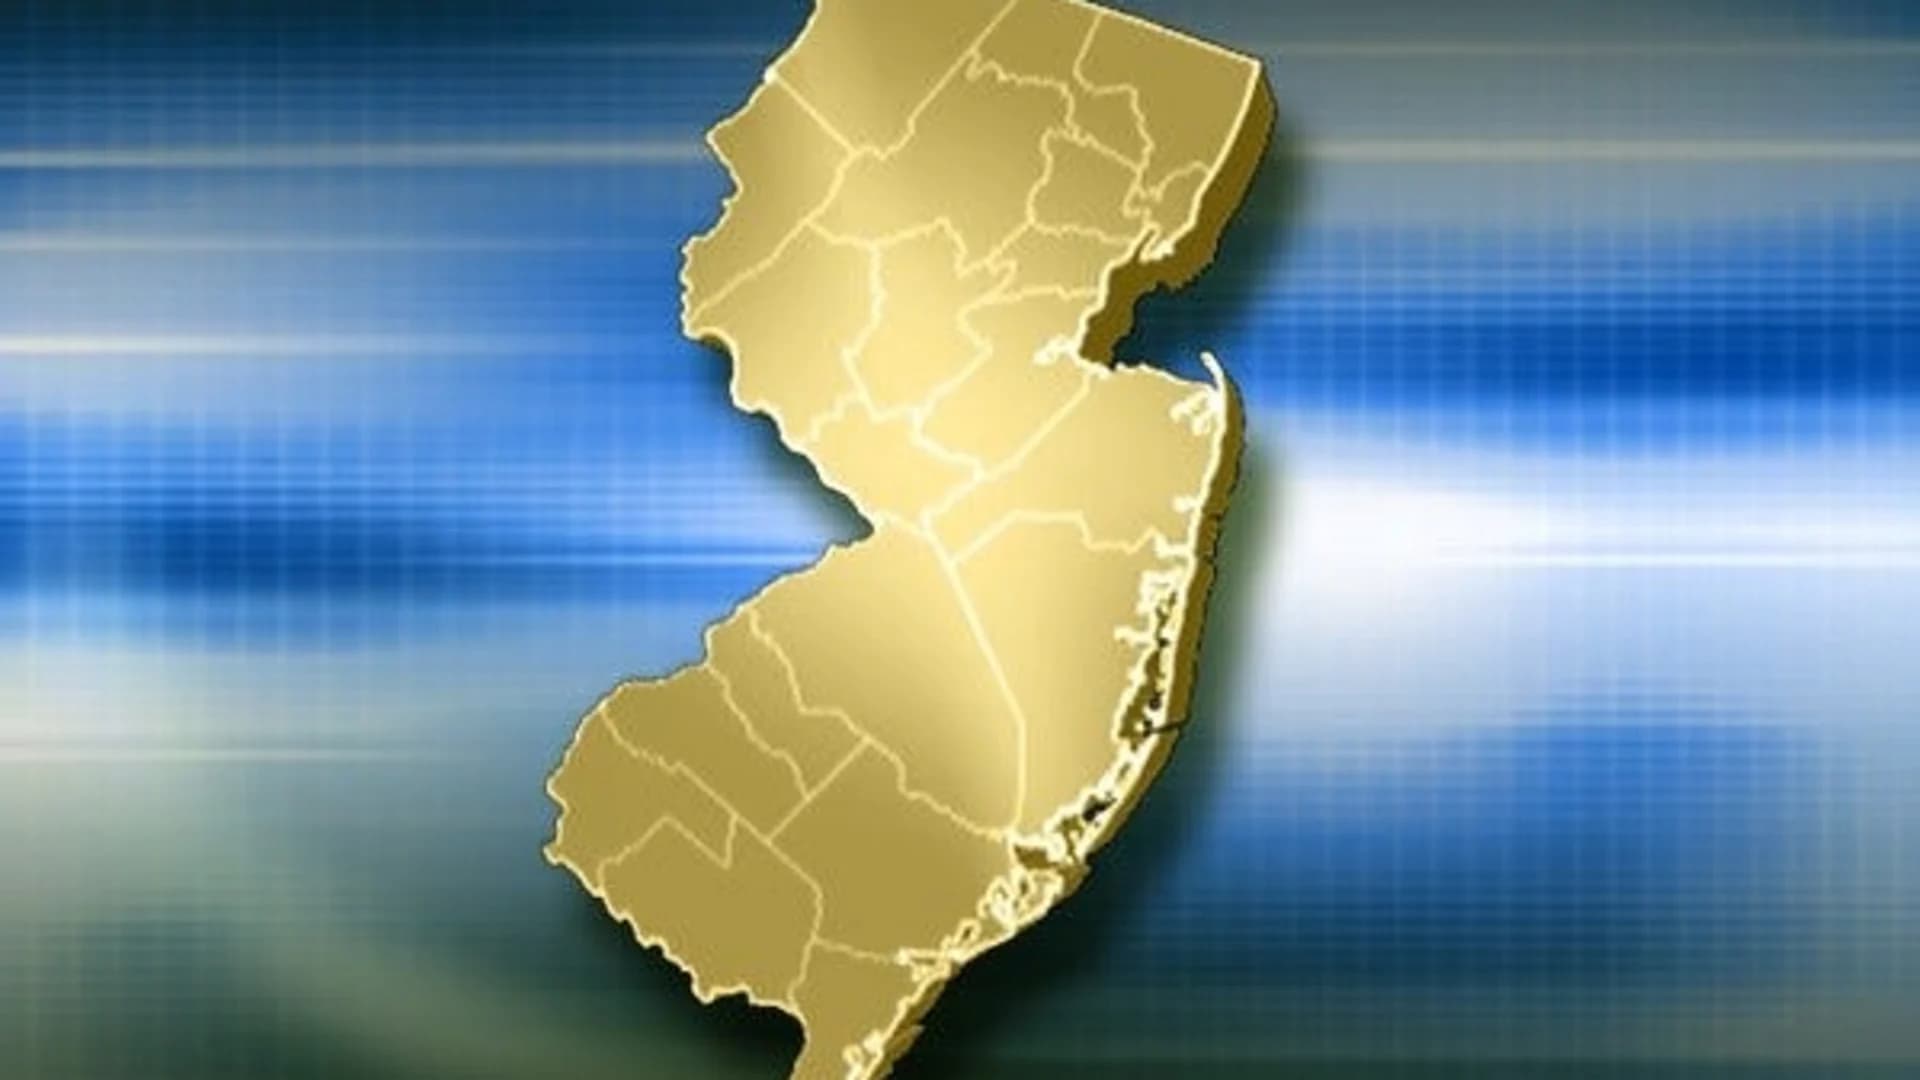 July 27 marks National New Jersey Day